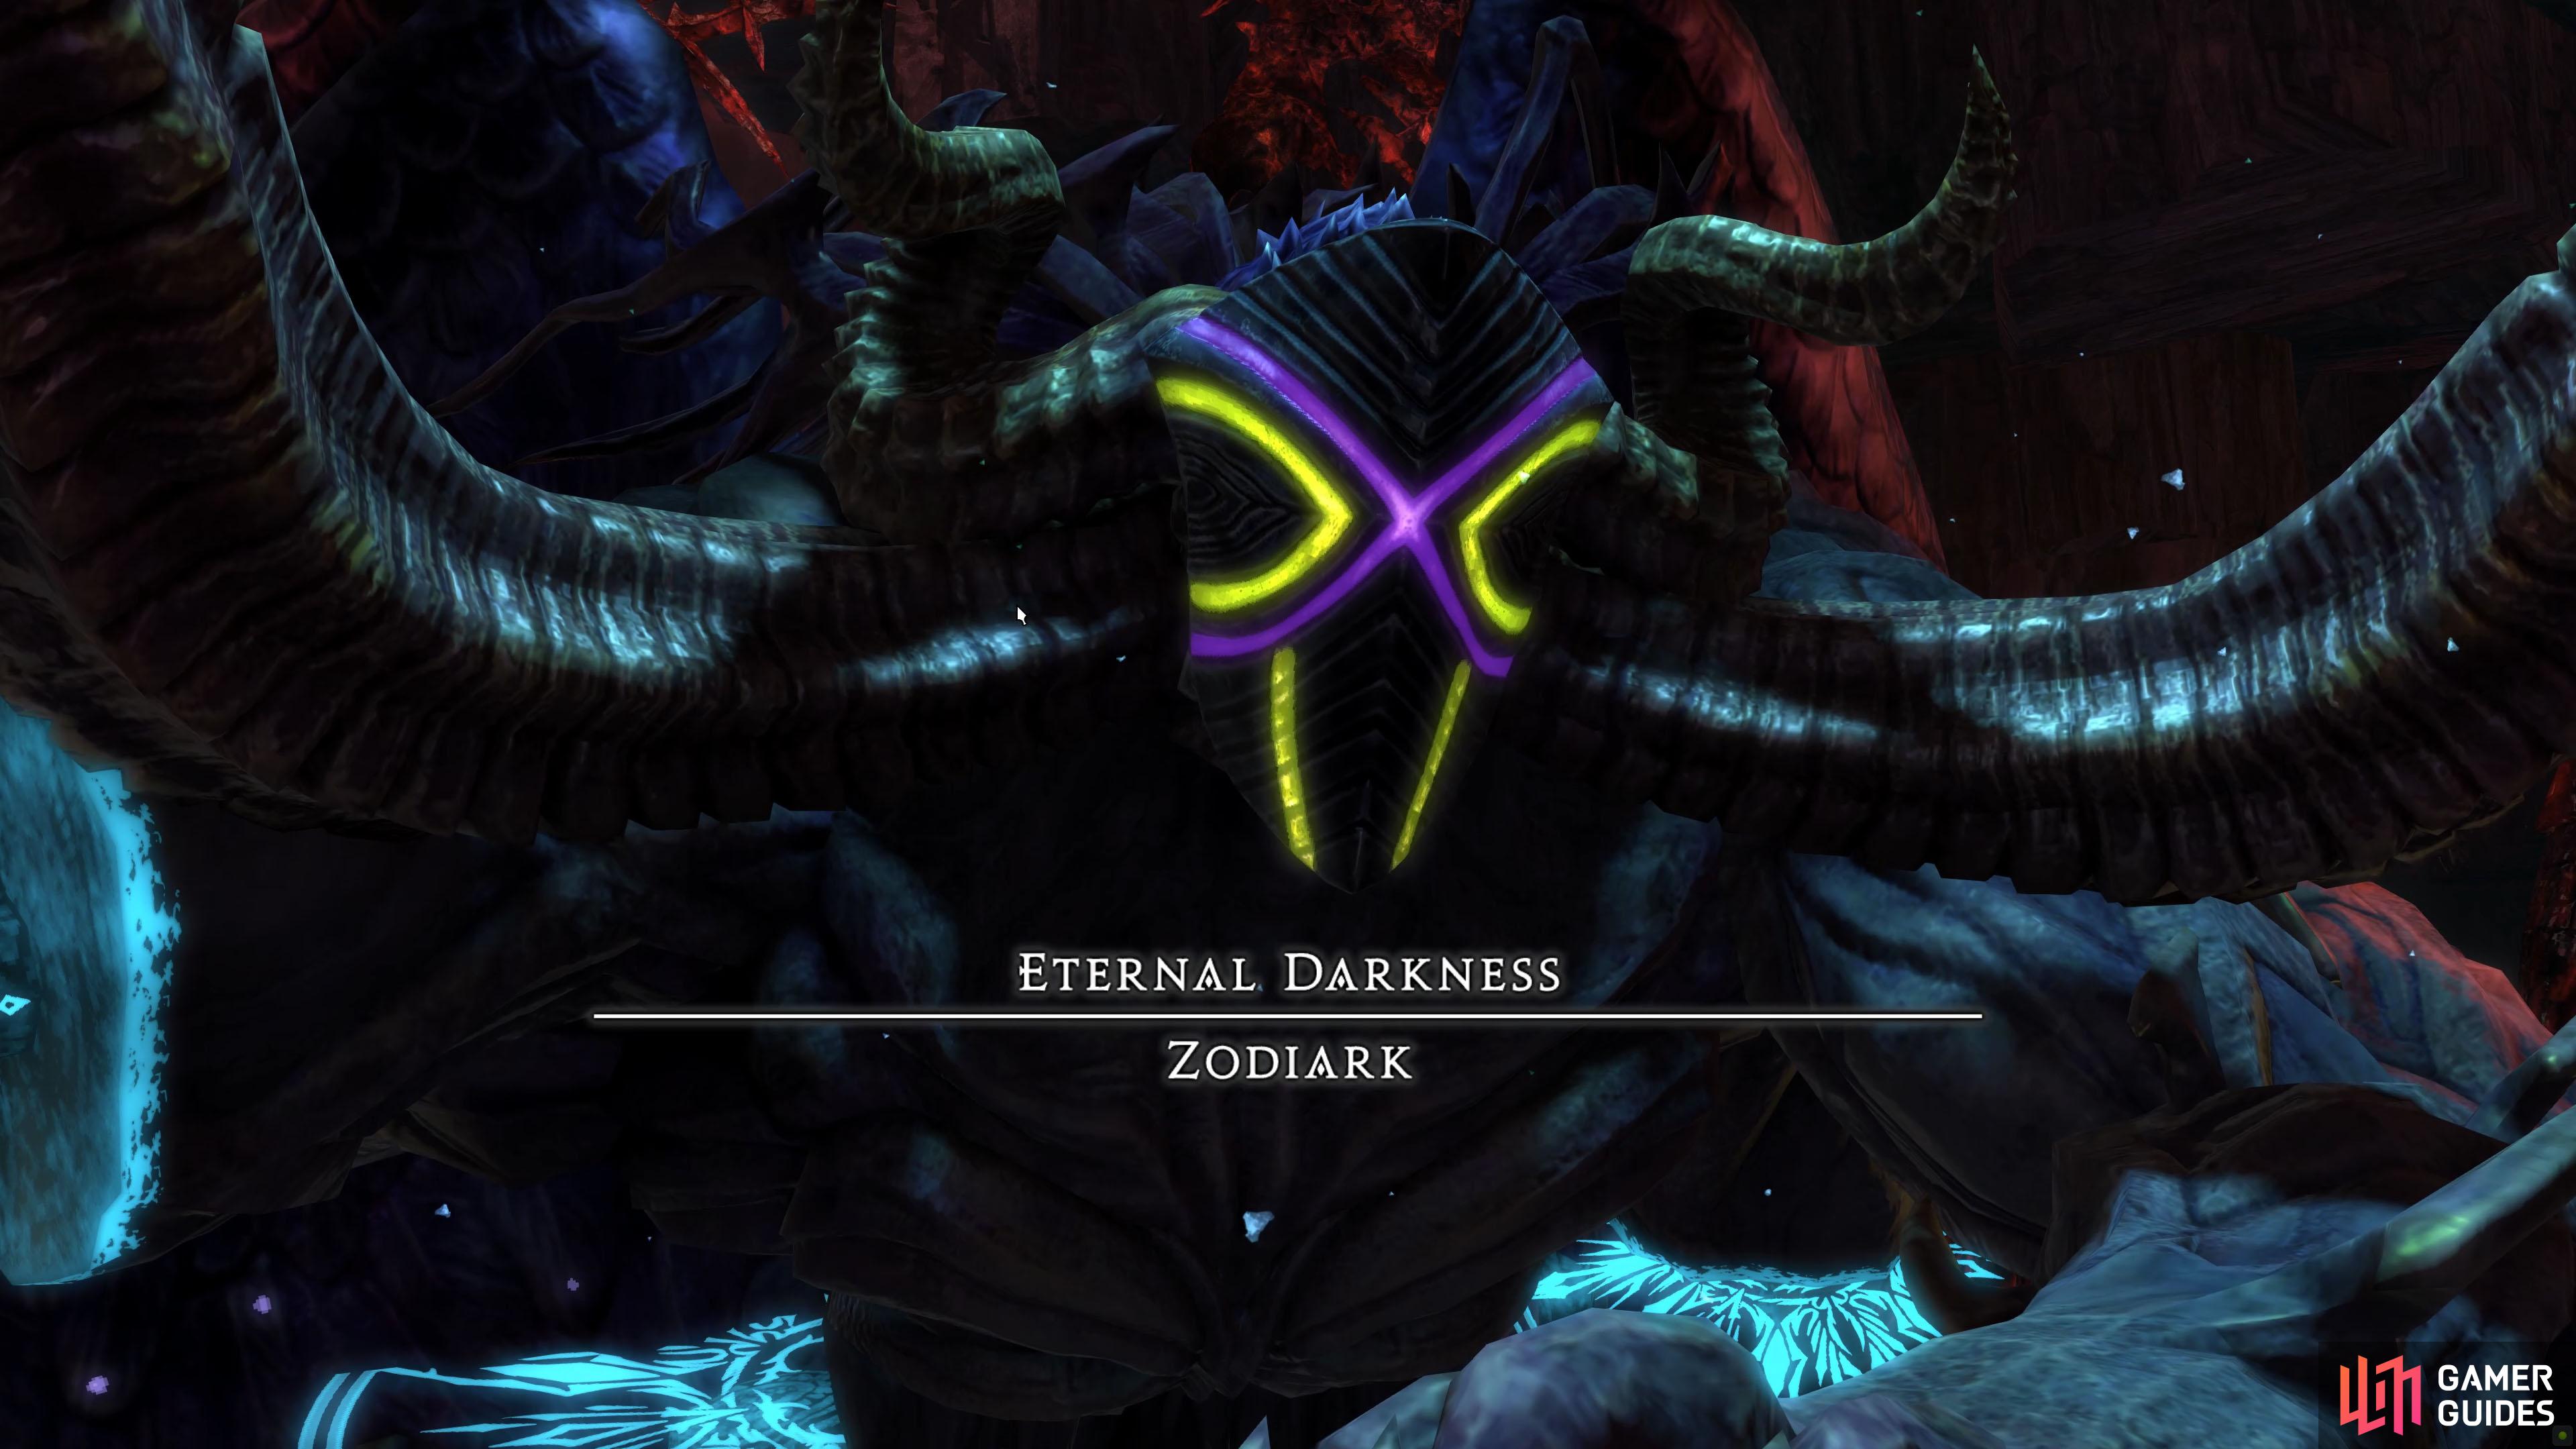 You'll need to defeat Zodiark in the Extreme Trial to get a chance at looting the Lynx of Eternal Darkness.